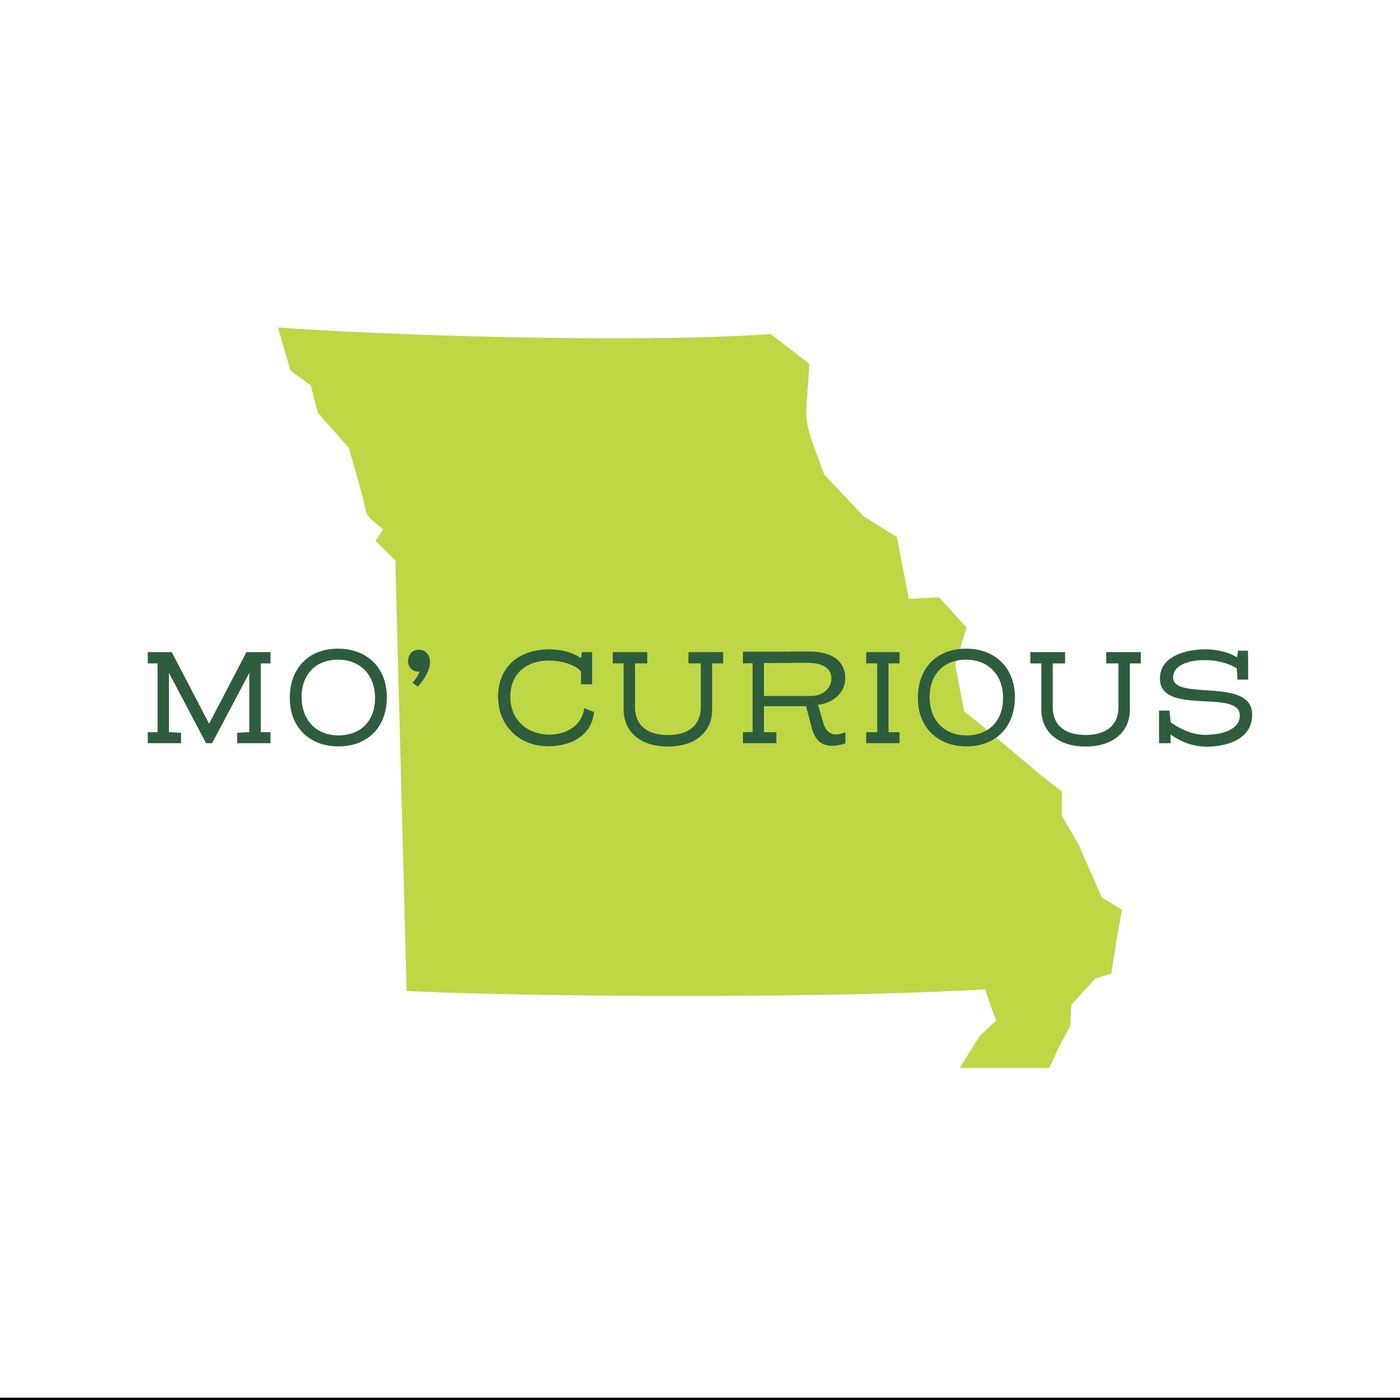 Mo' Curious: The living legacy of Missouri's dramatic 1939 sharecroppers' strike (part 1)